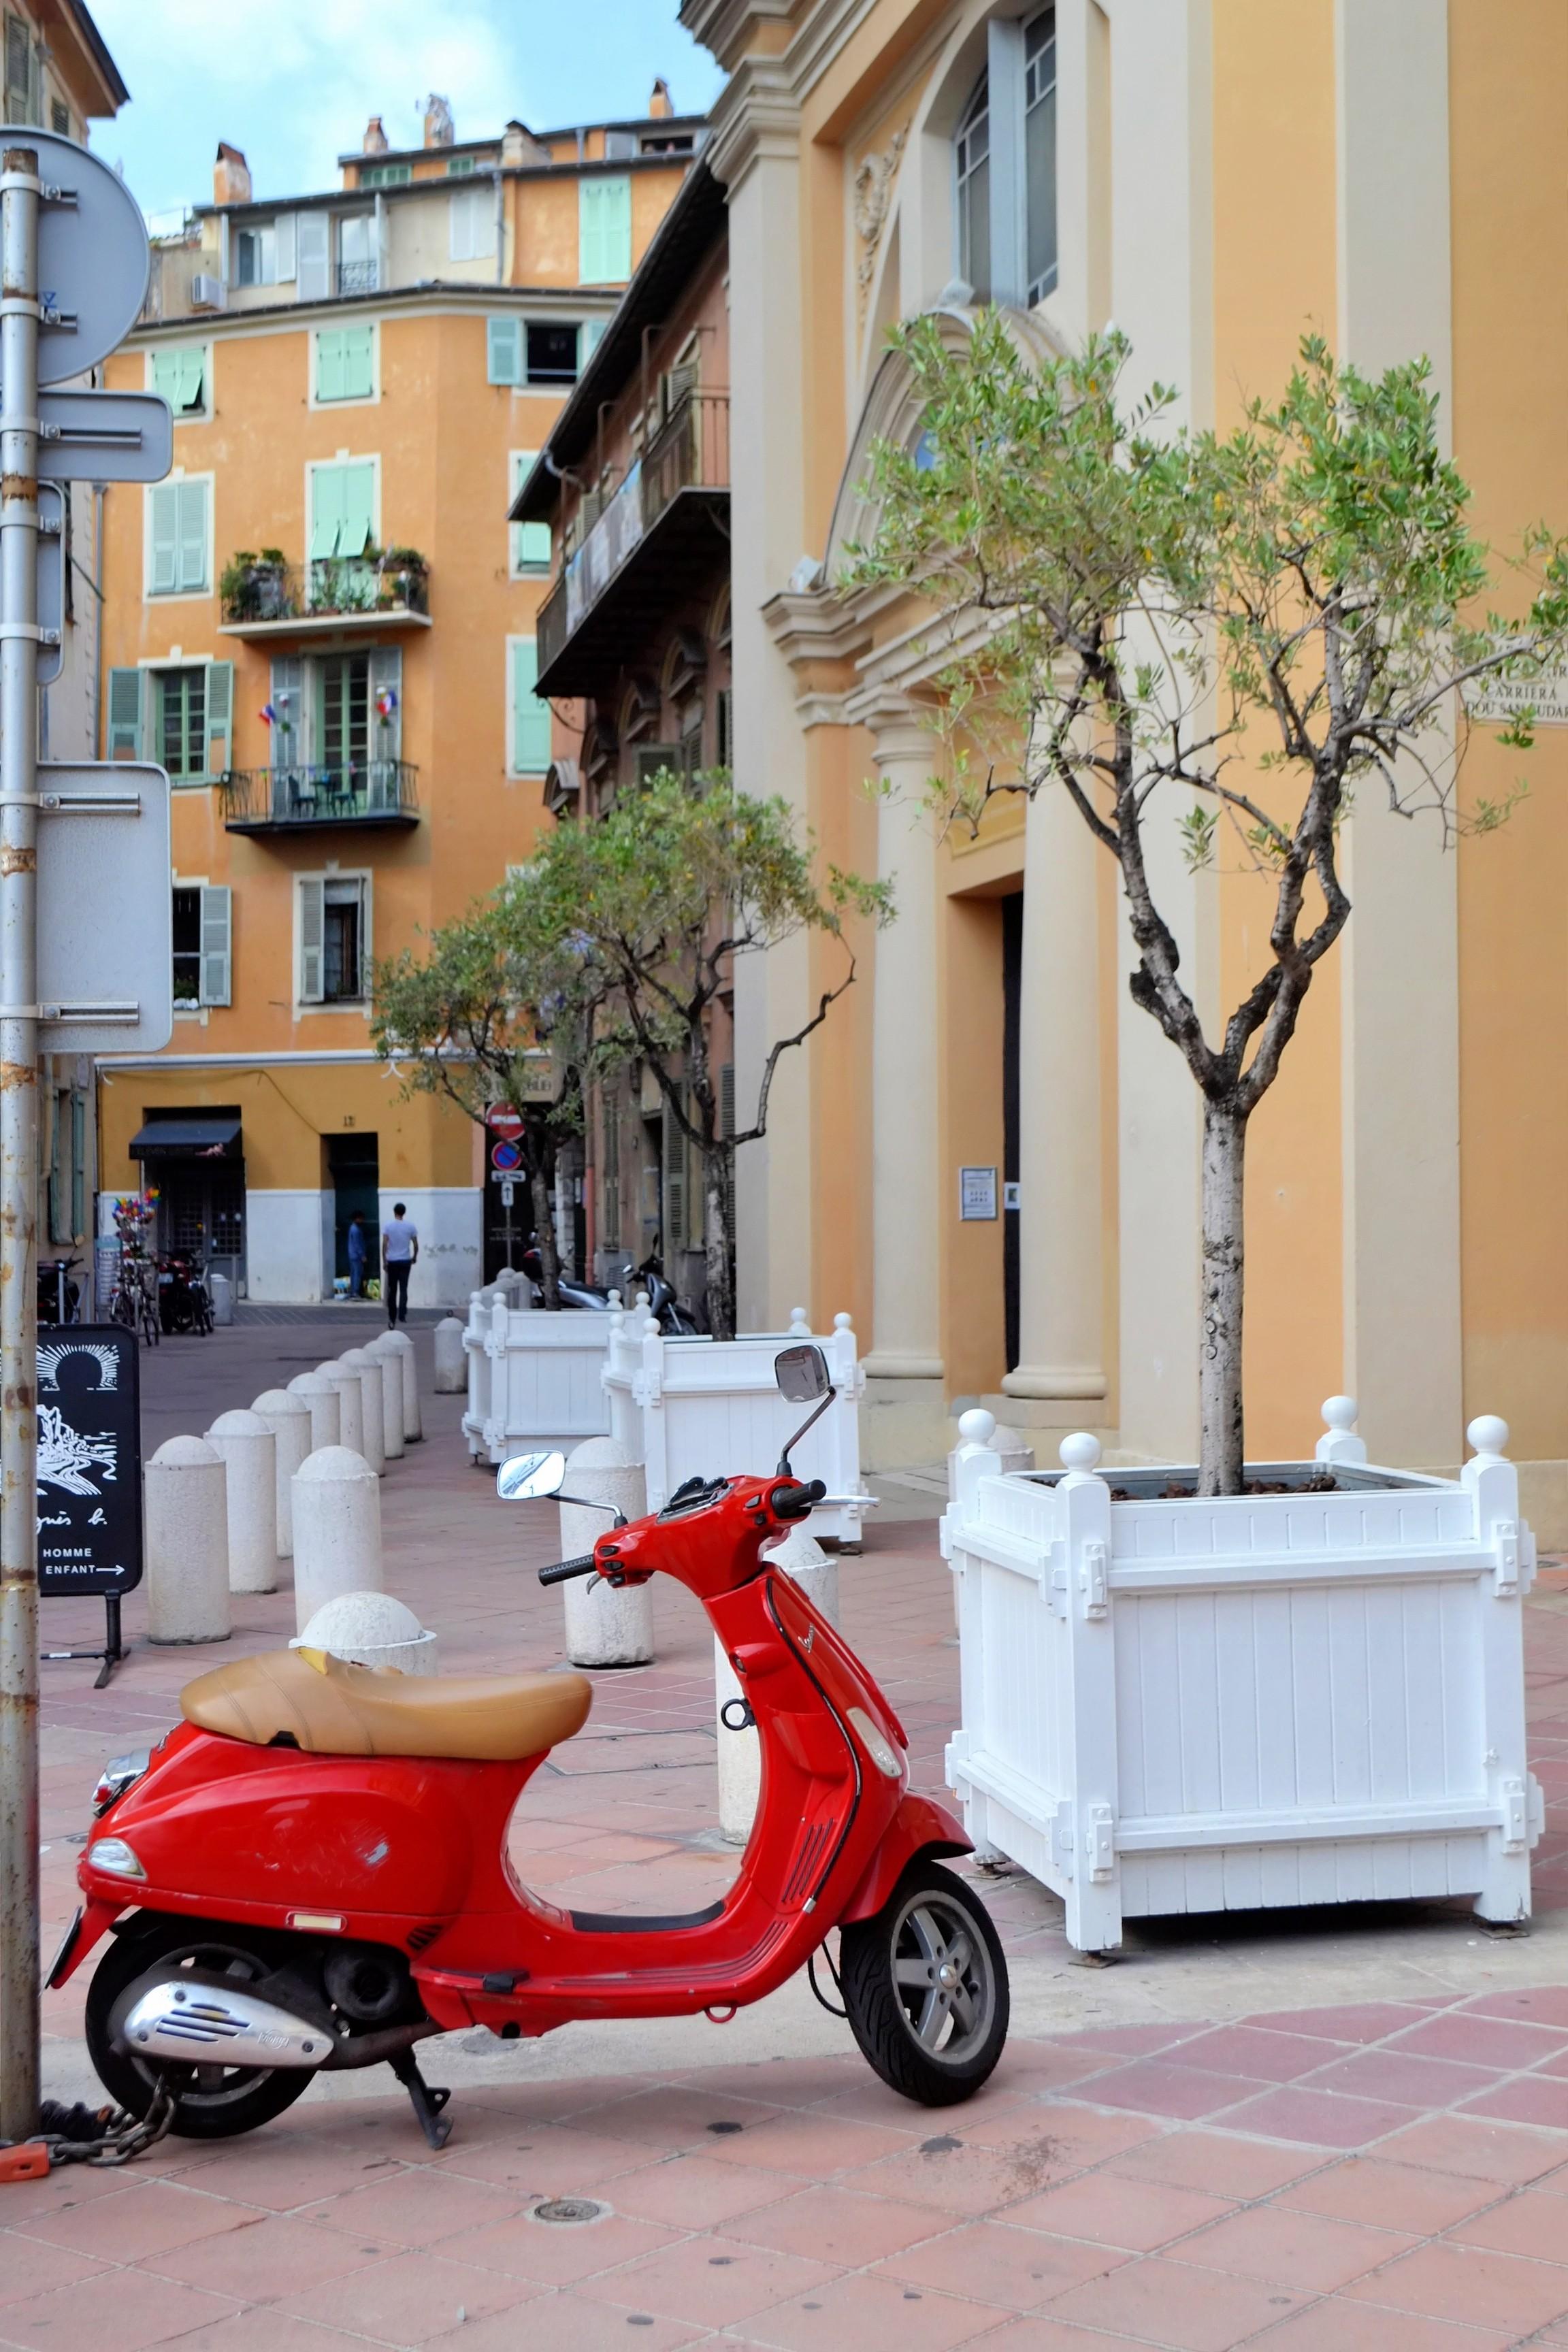 4 days in Nice - what to see, where to sleep? – image 4